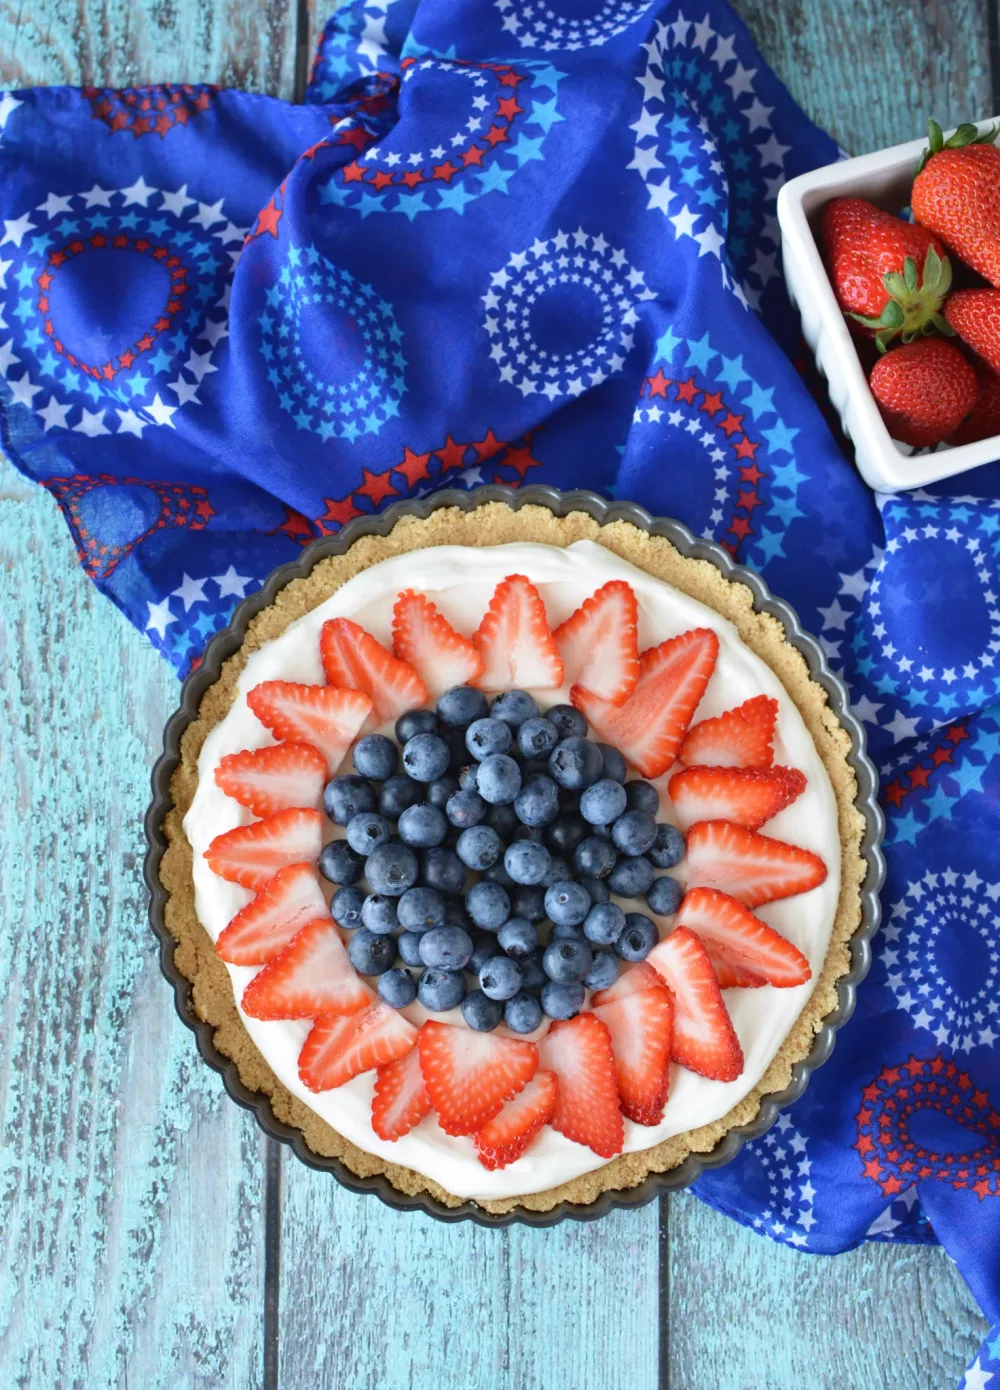 Strawberry Blueberry Tart filled with cream cheese filling and decorated with blueberries and strawberries